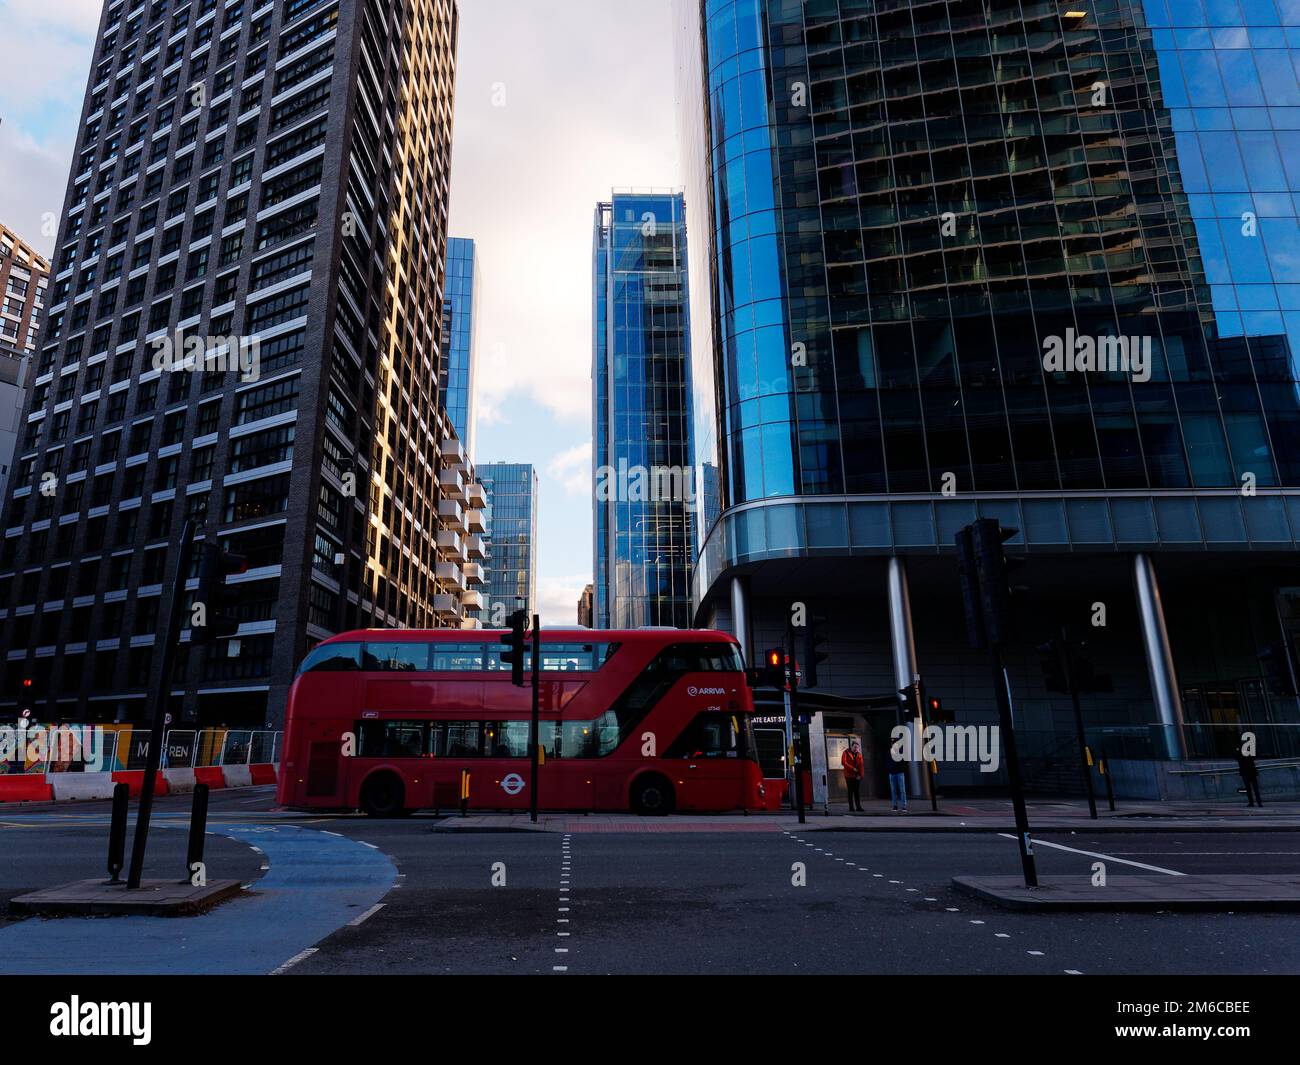 Red bus at a junction in the Aldgate East area surrounded by modern buildings approaching sunset on a winters evening. London, England. Stock Photo